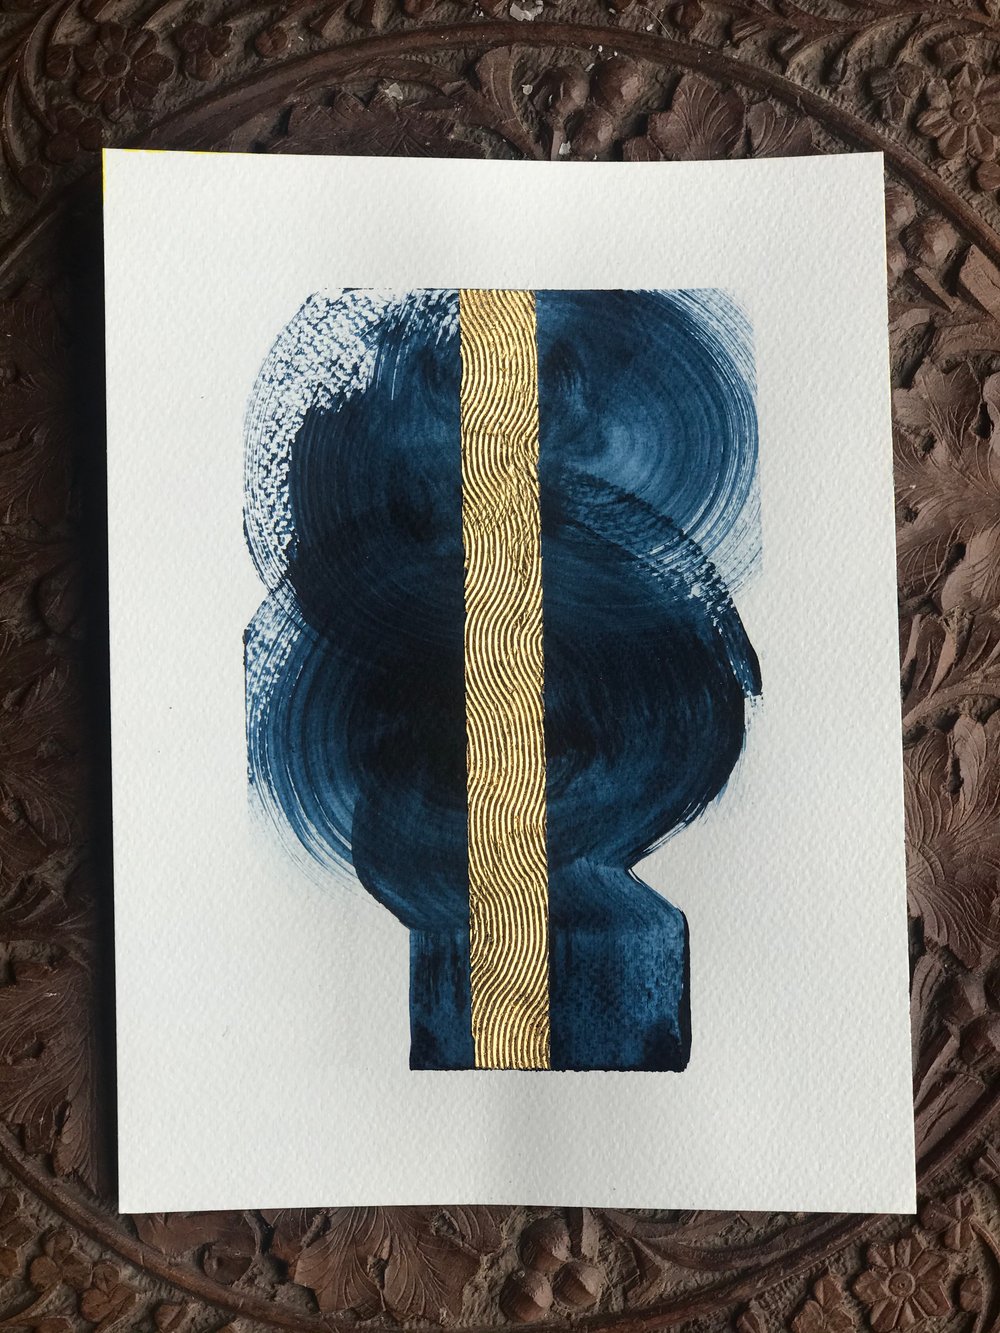 Image of One line - prussian blue and gold - 18x24 cm acrylic and 23,75 carat gold on aquarelle paper